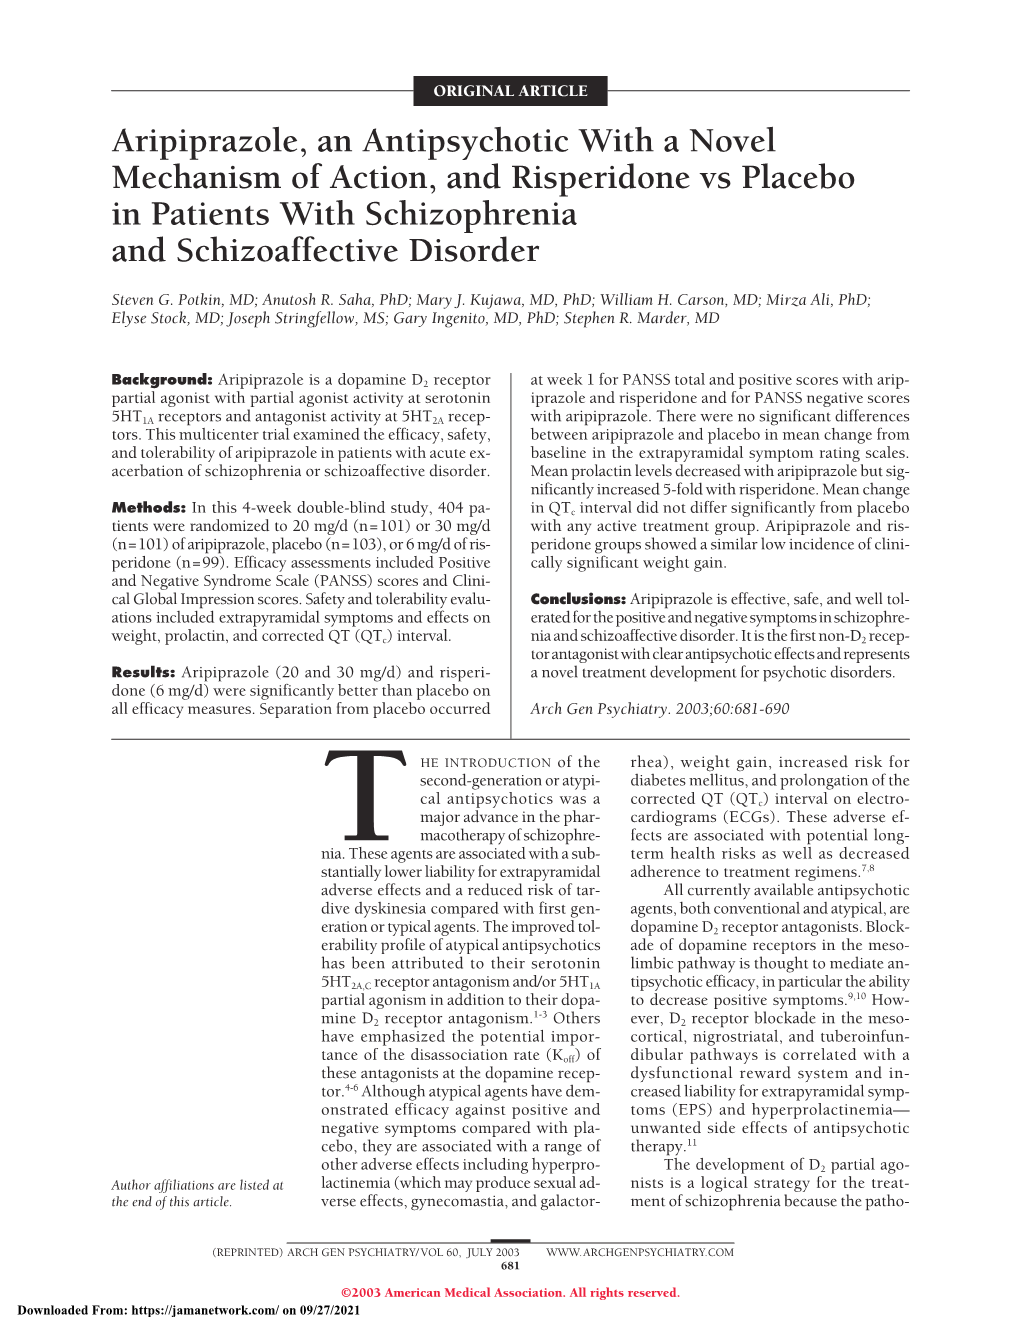 Aripiprazole, an Antipsychotic with a Novel Mechanism of Action, and Risperidone Vs Placebo in Patients with Schizophrenia and Schizoaffective Disorder